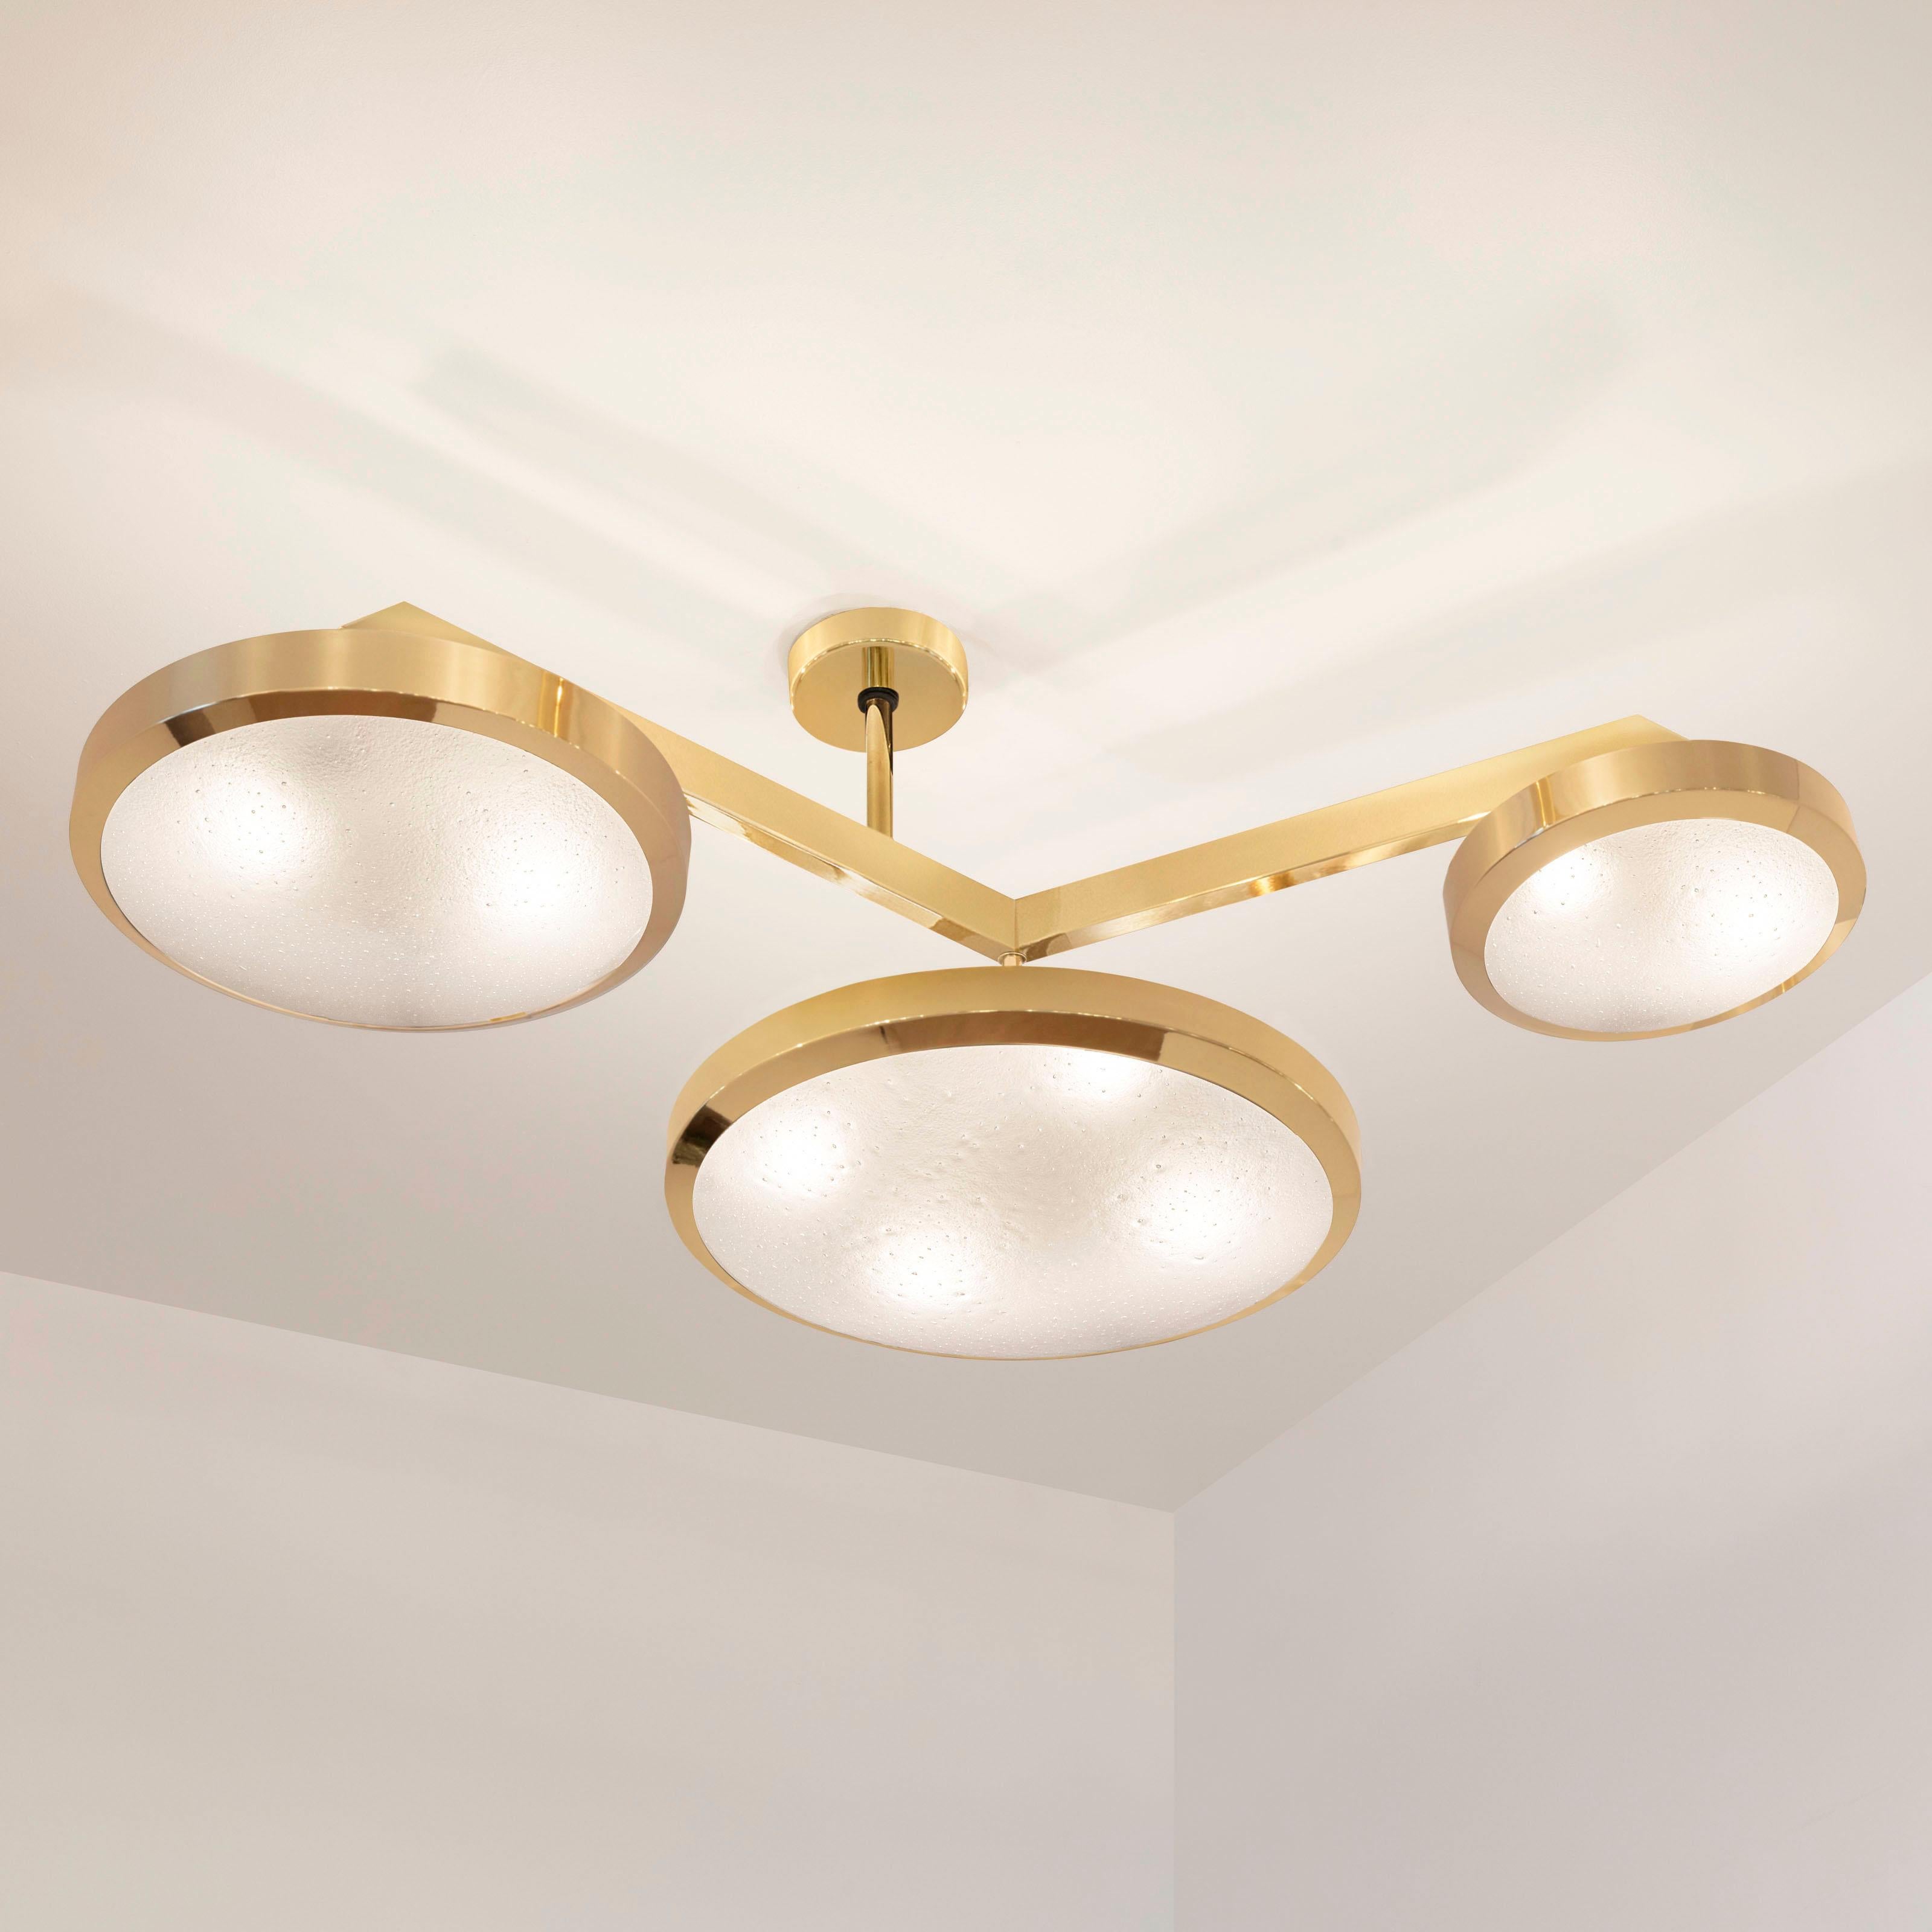 Modern Zeta Ceiling Light by Gaspare Asaro - Polished Brass Finish For Sale